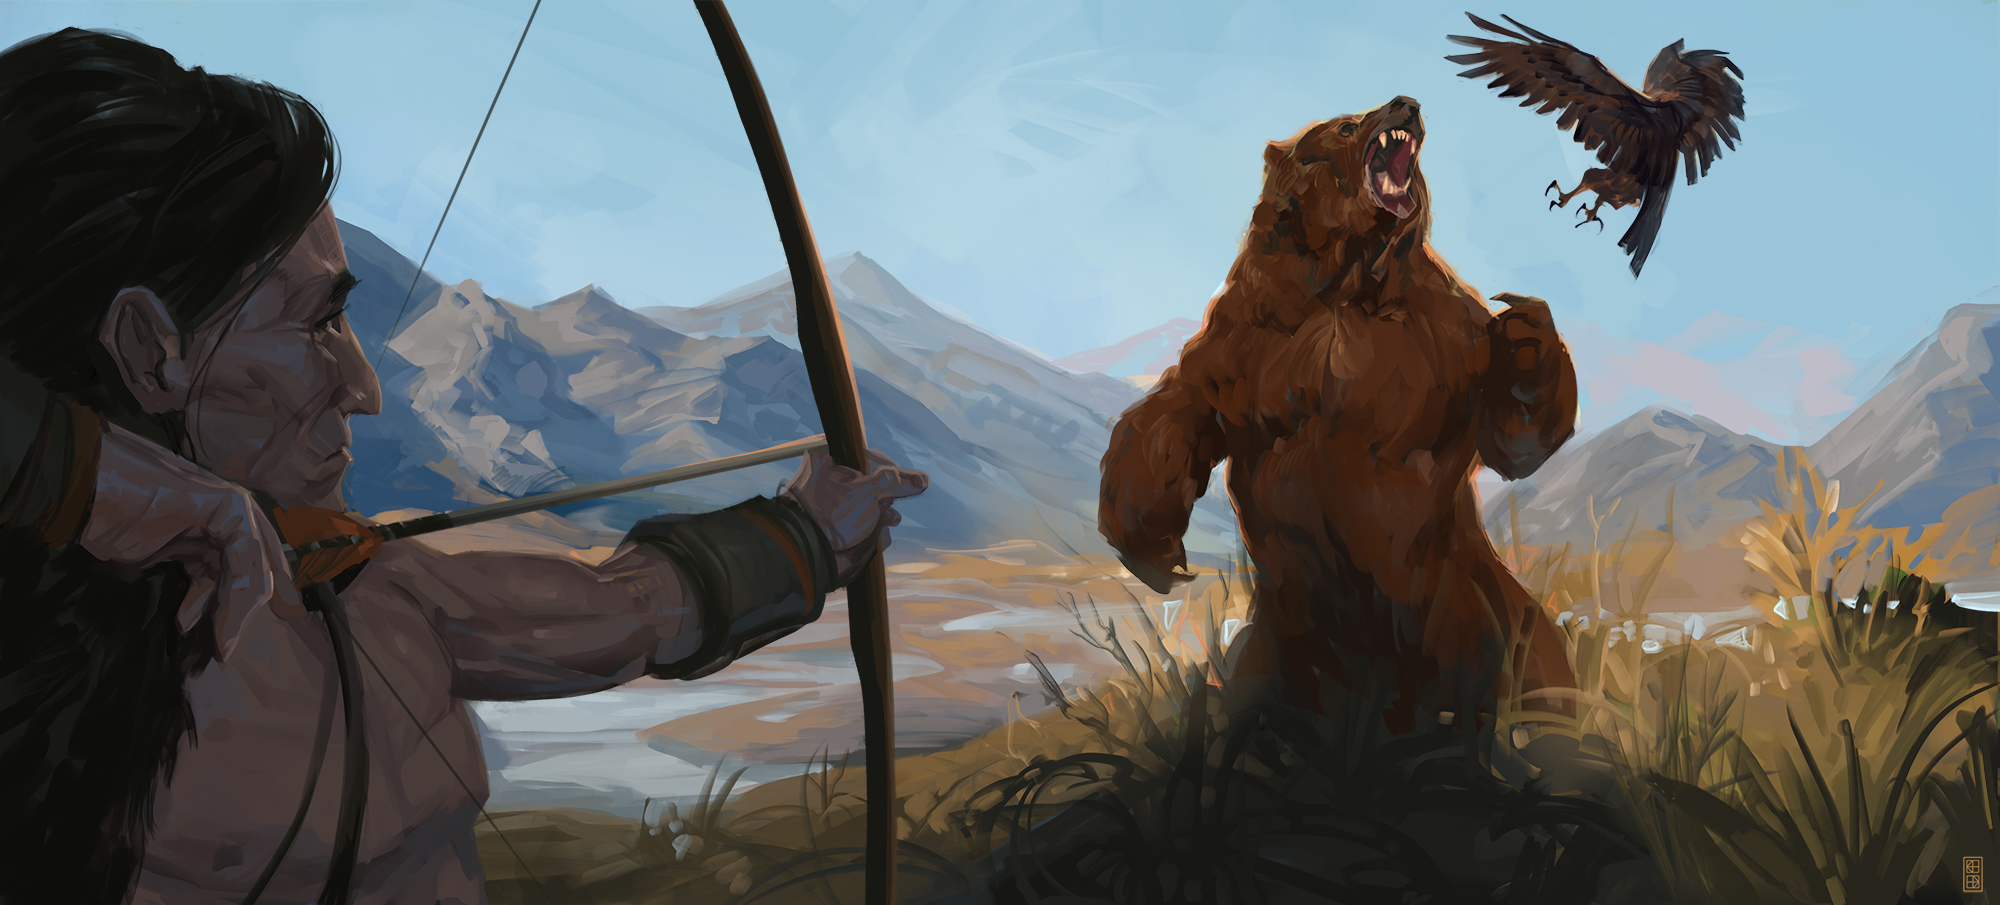 A lone hunter draws a bow, aiming at a bear standing on two legs. The bear is distracted by a falcon flying near its head. Large mountains loom in the distance